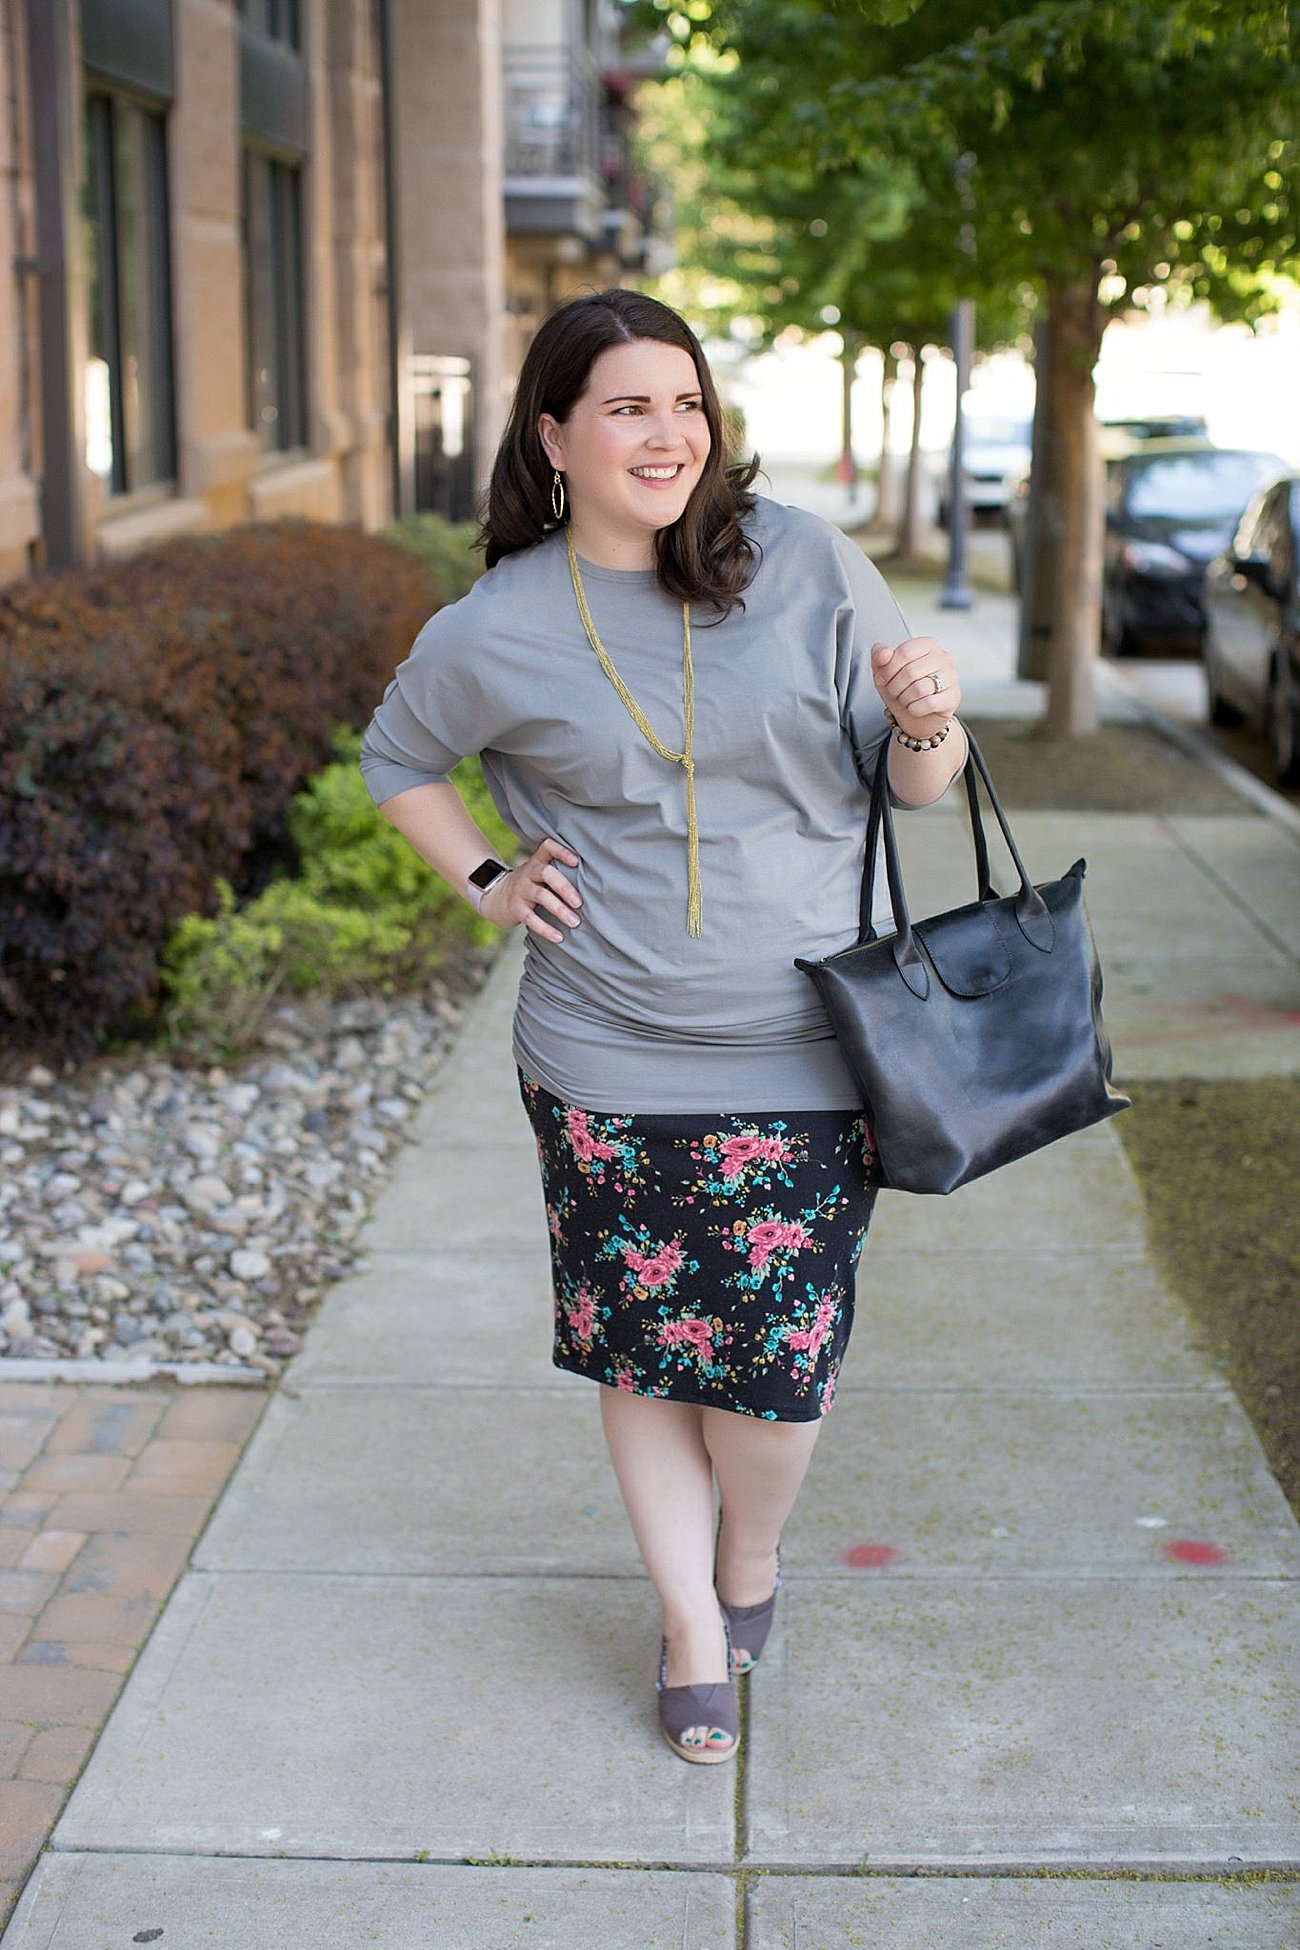 Elegantees "Cassie" ruched dolman sleeve tunic, Agnes & Dora floral pencil skirt, TOMS wedges, ethical fashion blogger (7)